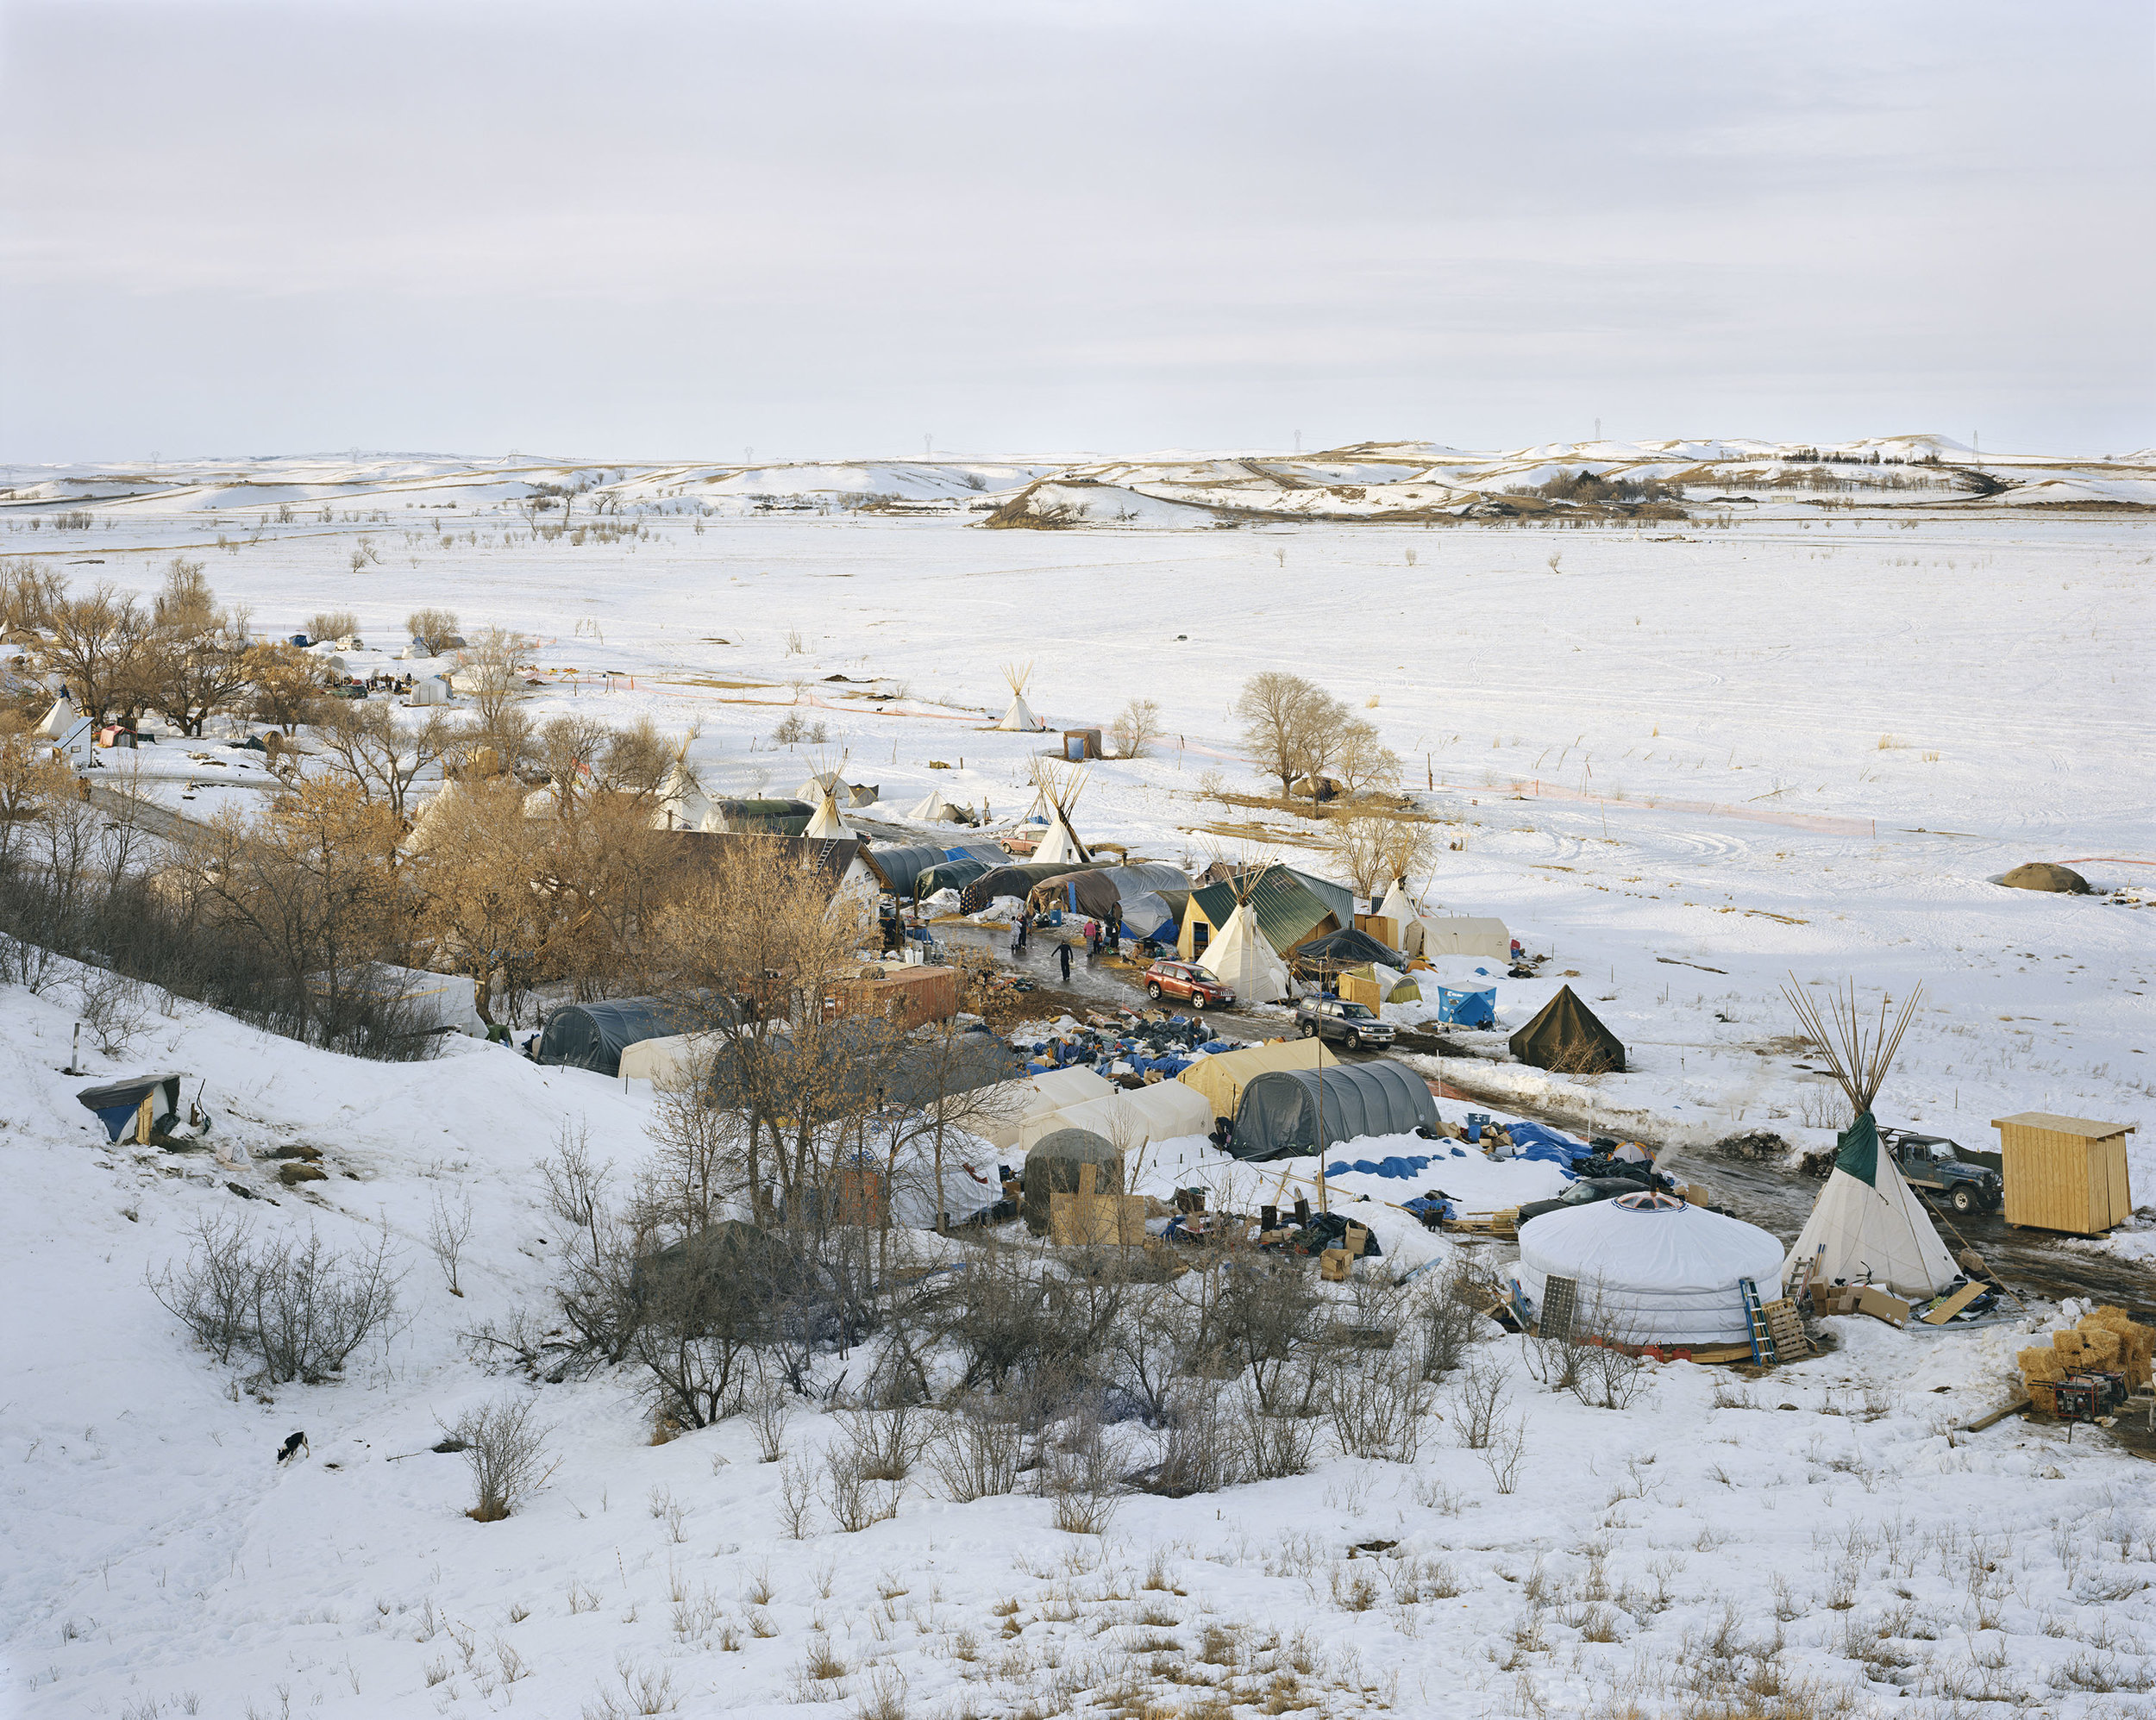 Sacred Stone Camp, Standing Rock Sioux Reservation, North Dakota 2017, 2017